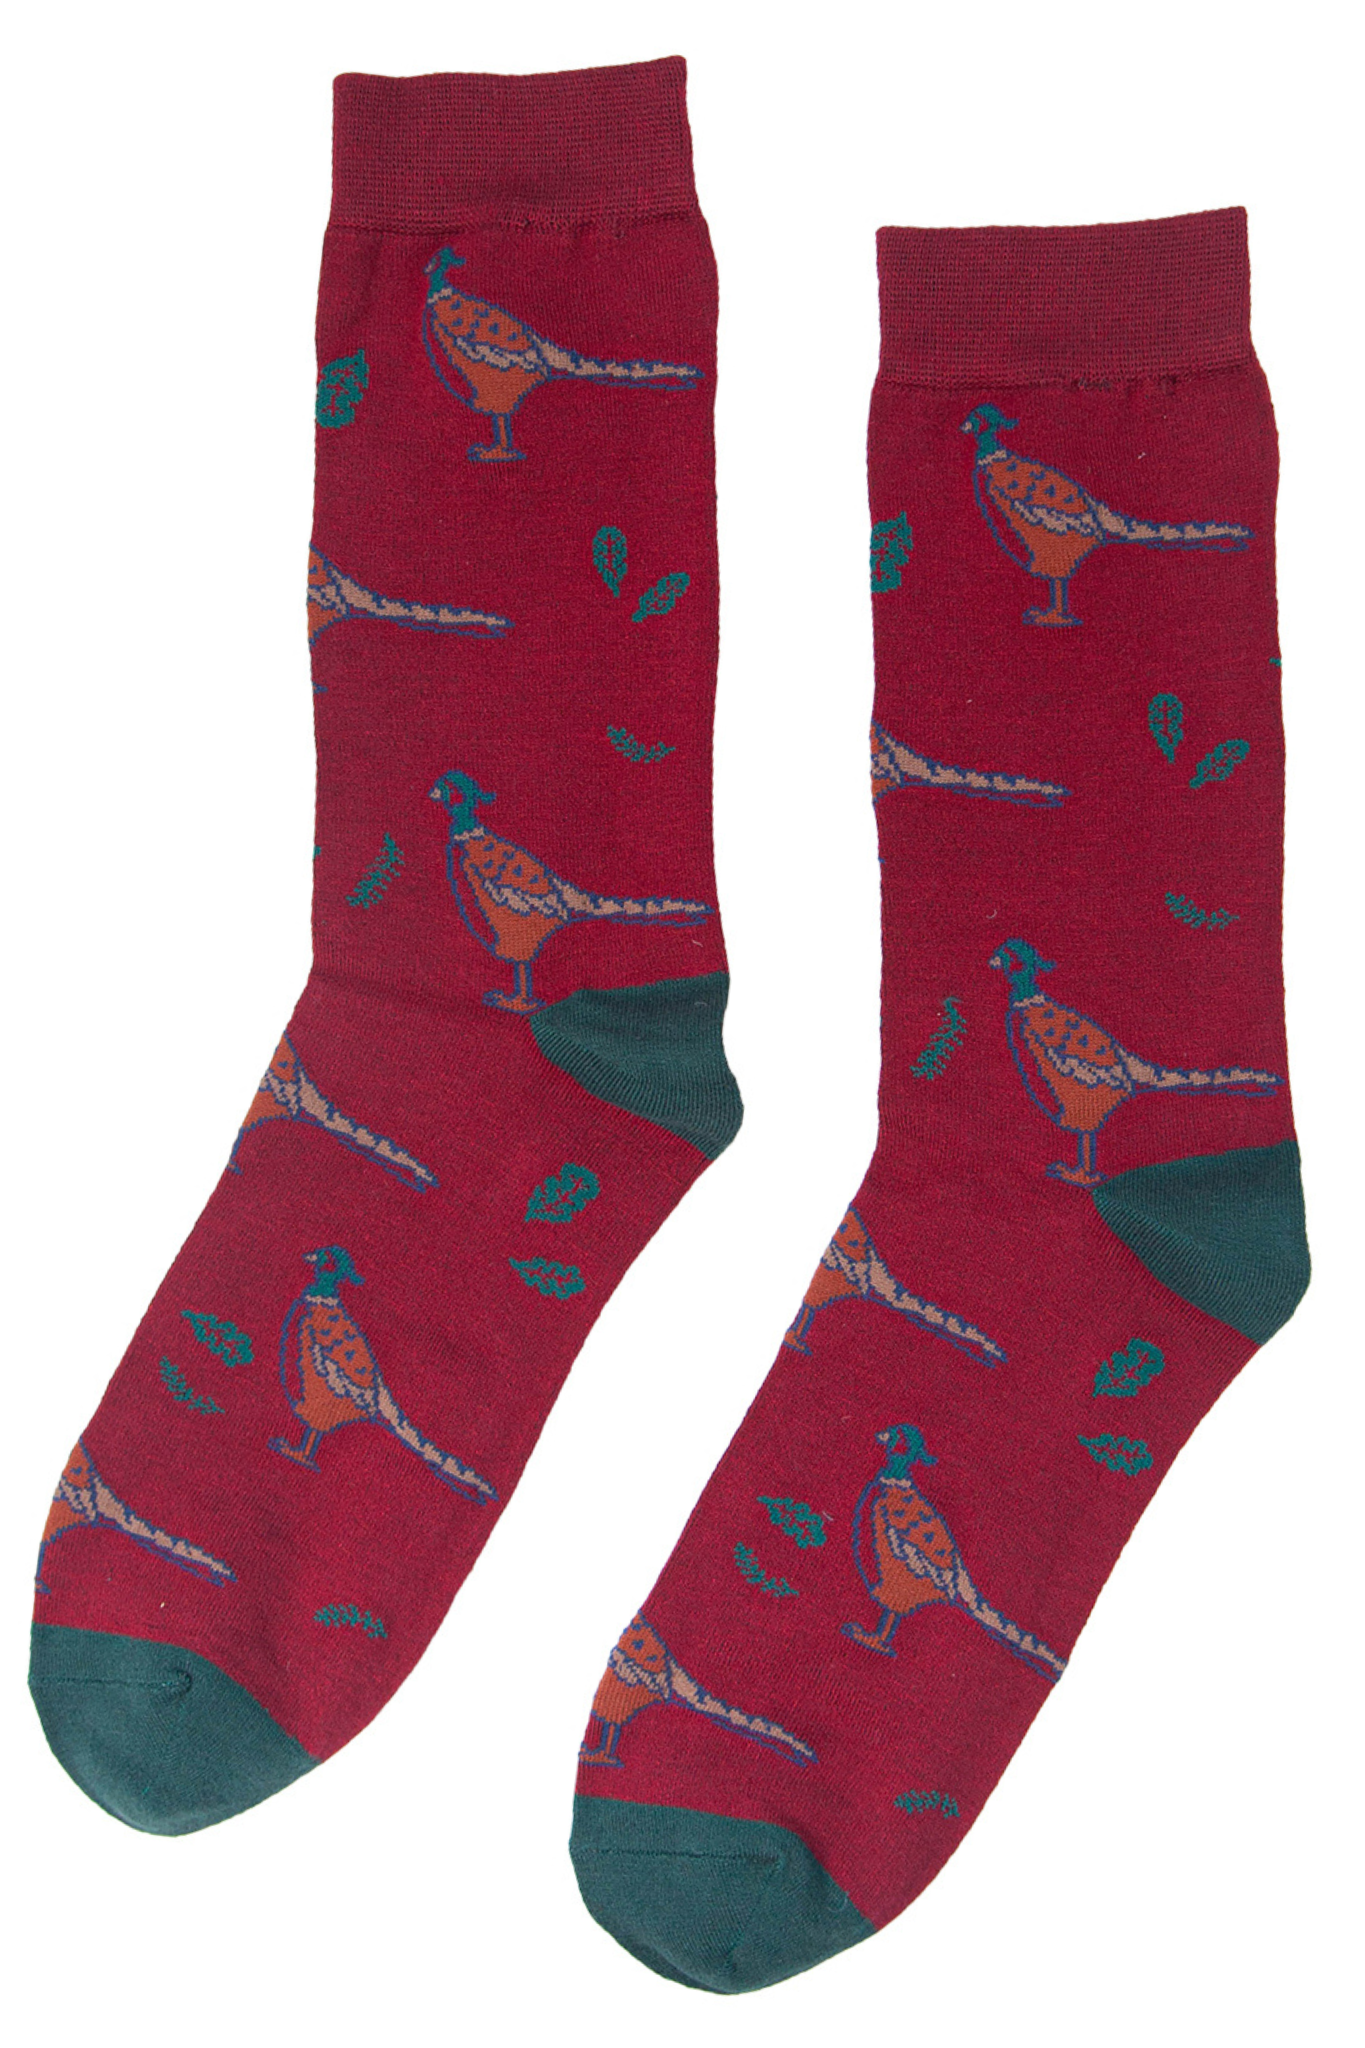 red and green dress socks with pheasant birds 